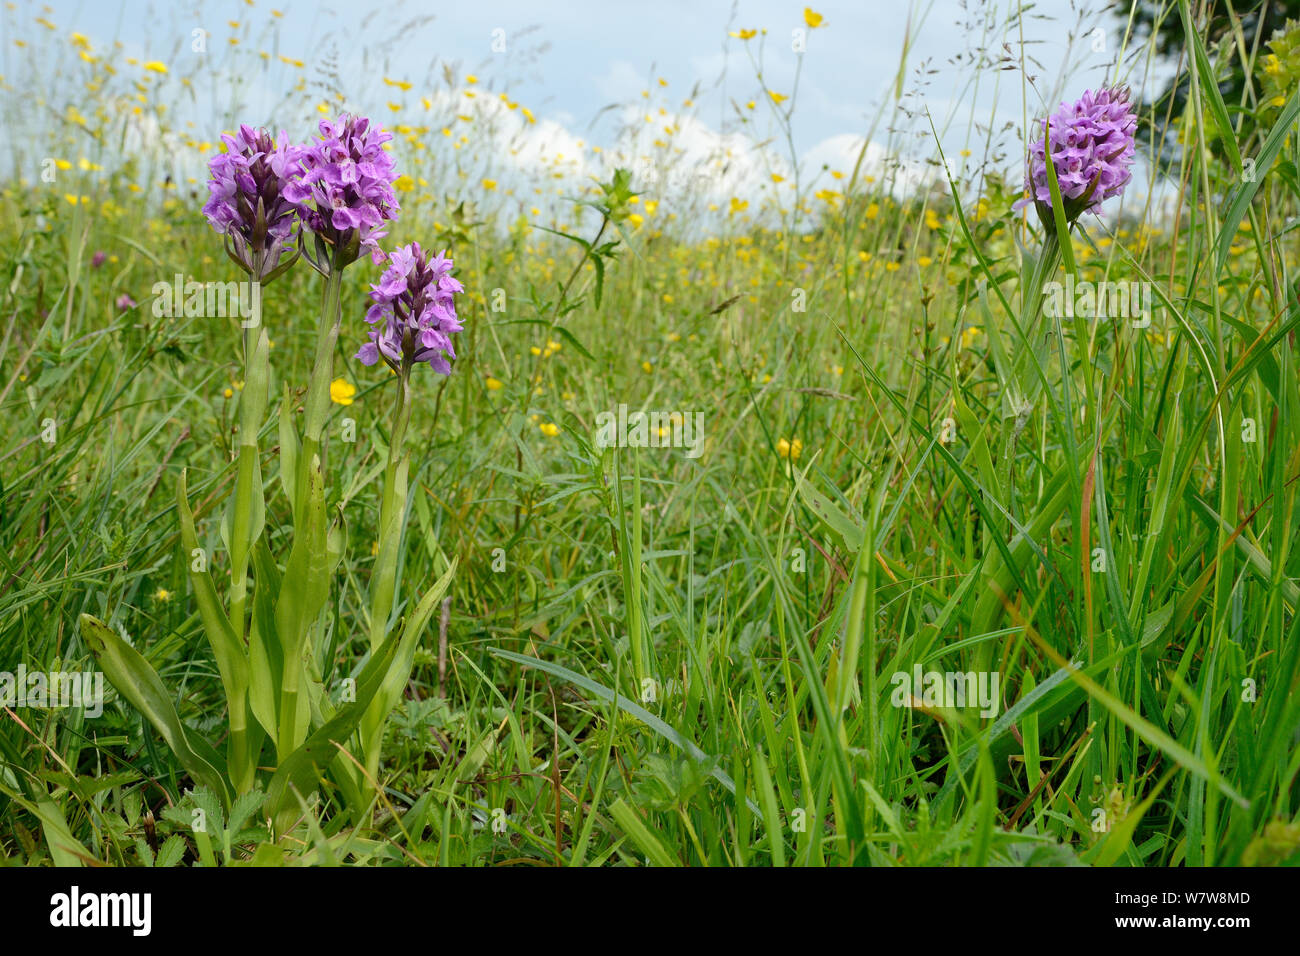 Southern marsh orchids (Dactylorhiza praeternissa) flowering in a traditional hay meadow, Wiltshire, UK, June. Stock Photo